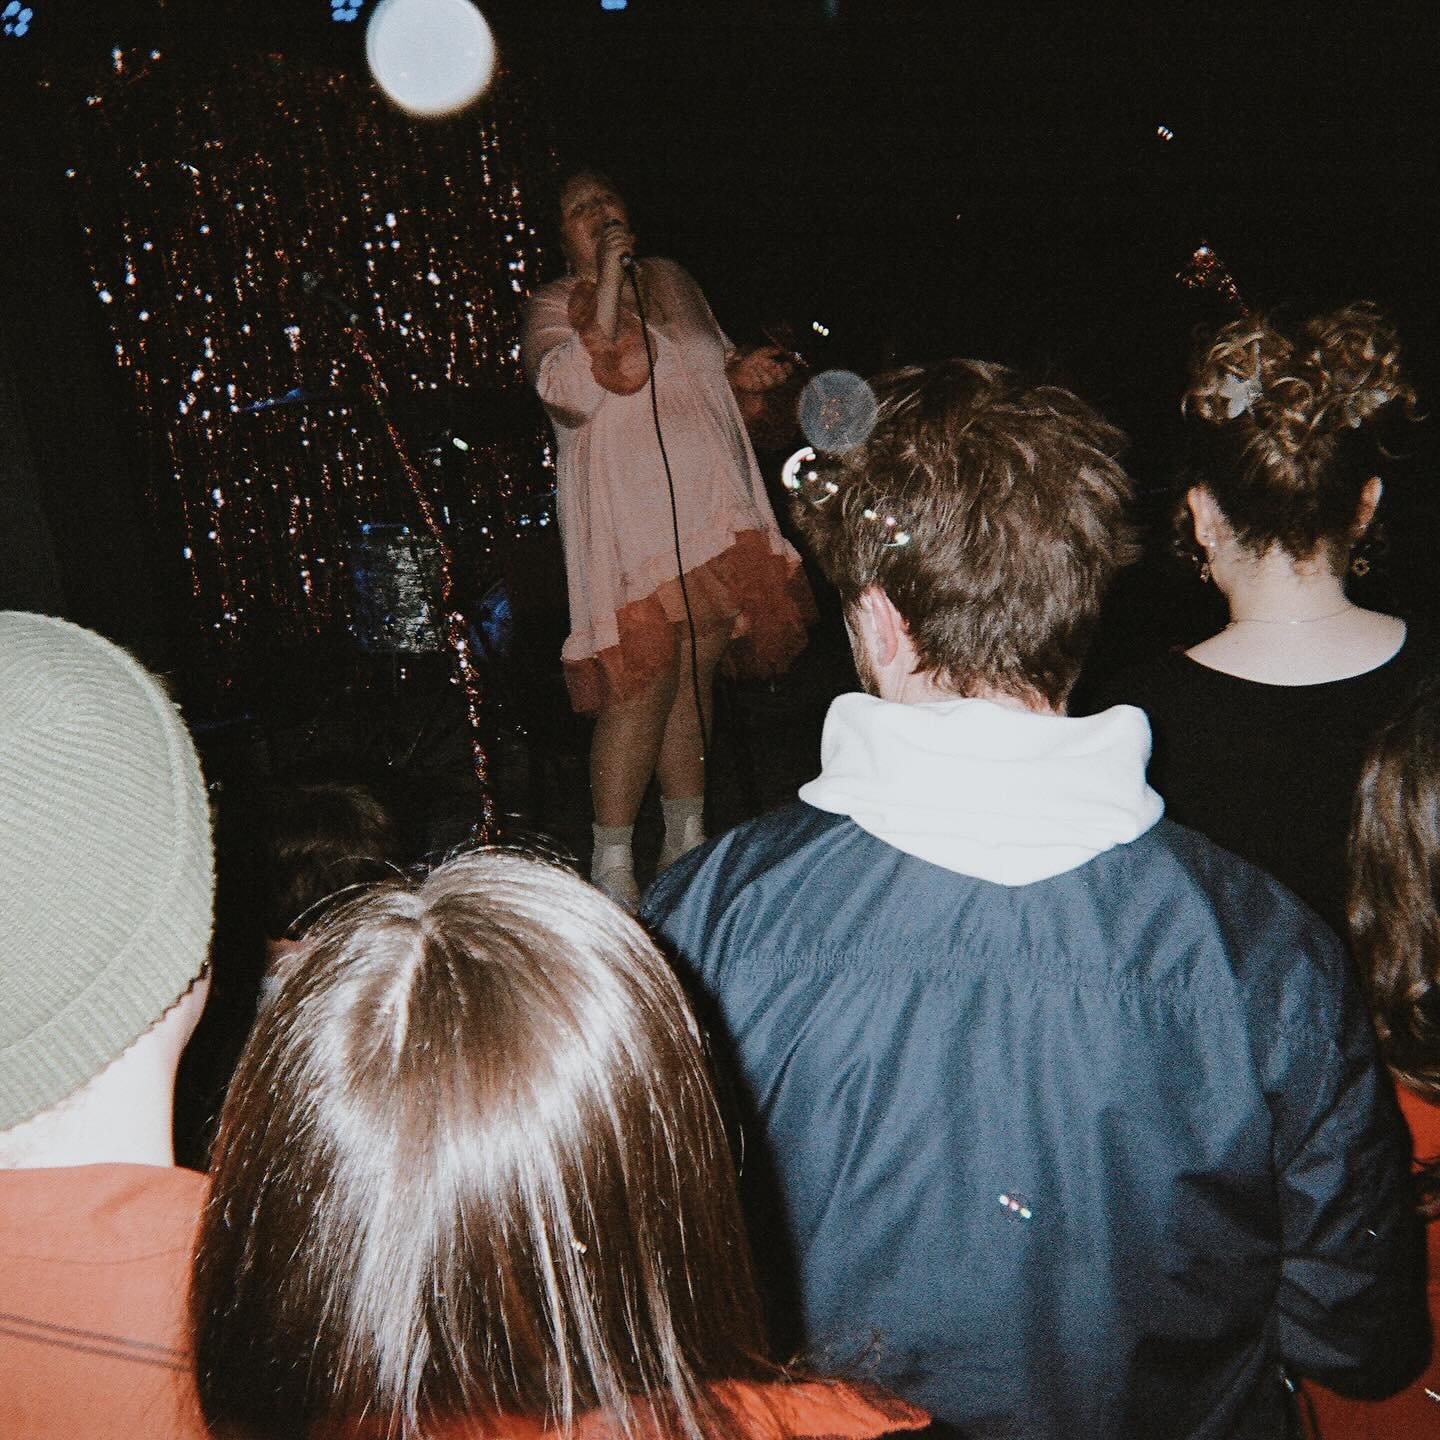 Post 1/2

GOT THE DISPOSABLE CAMERA PICS BACK FROM THE WINNIPEG SHOW APRIL 6!!!! WOW almost a month ago now?! Sheesh time flies.

Thanks to YOU, my lovely photographers, for capturing this show. We sure had a blast, didn&rsquo;t we?

💜💜💜